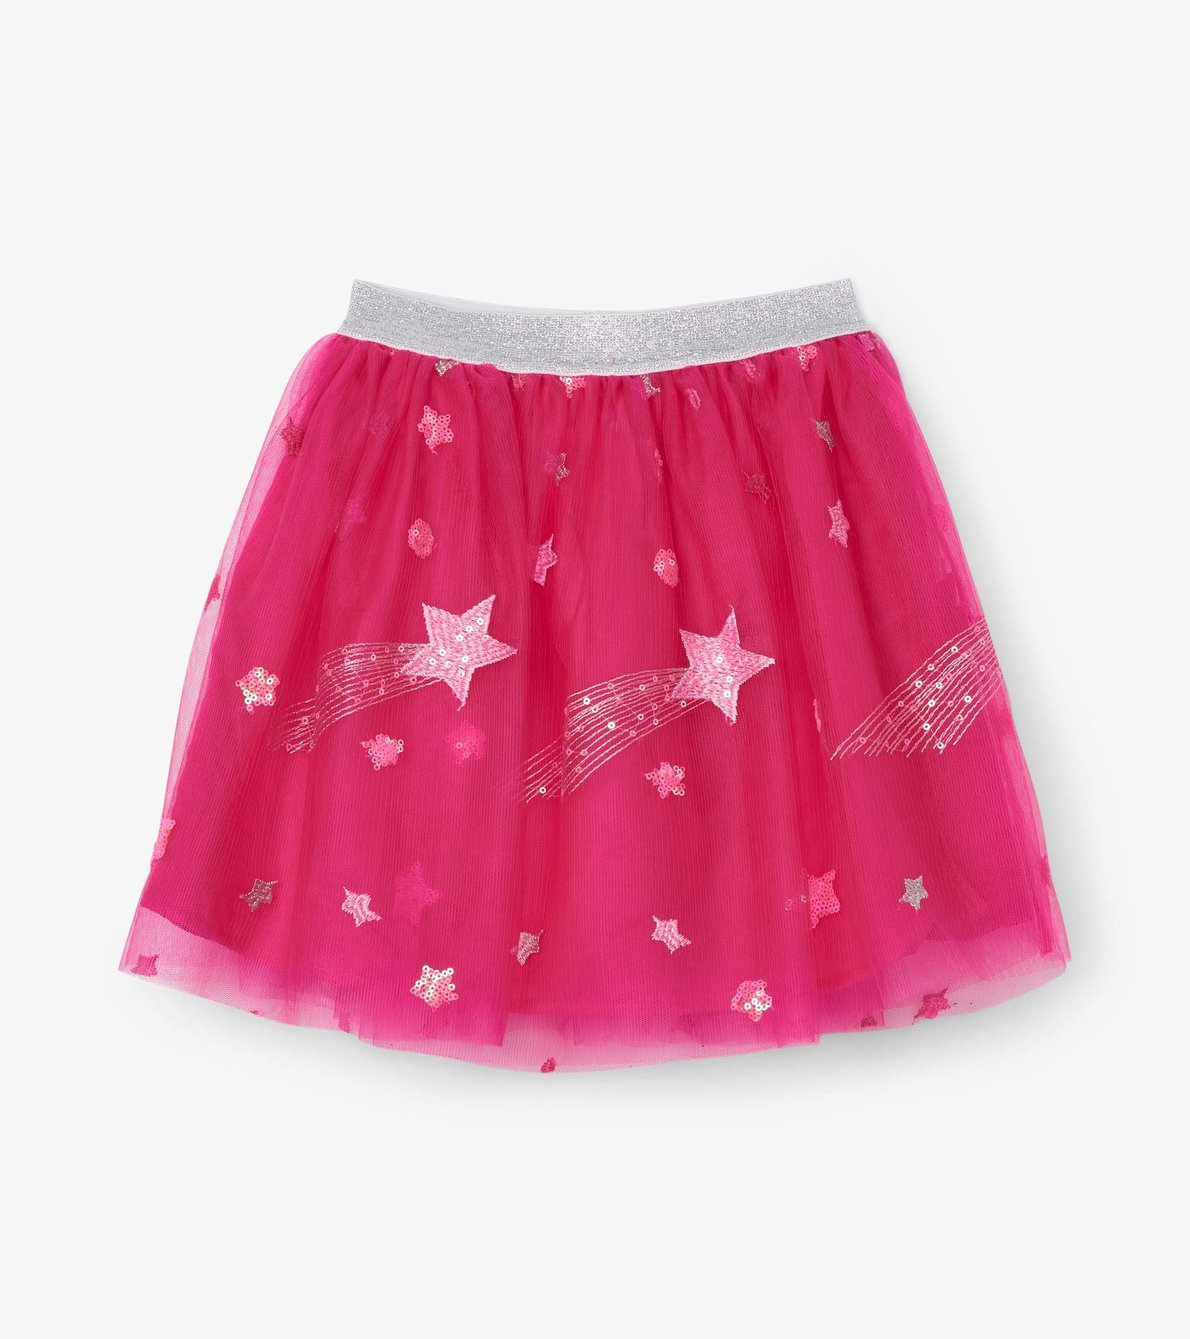 View larger image of Shooting Stars Tulle Skirt